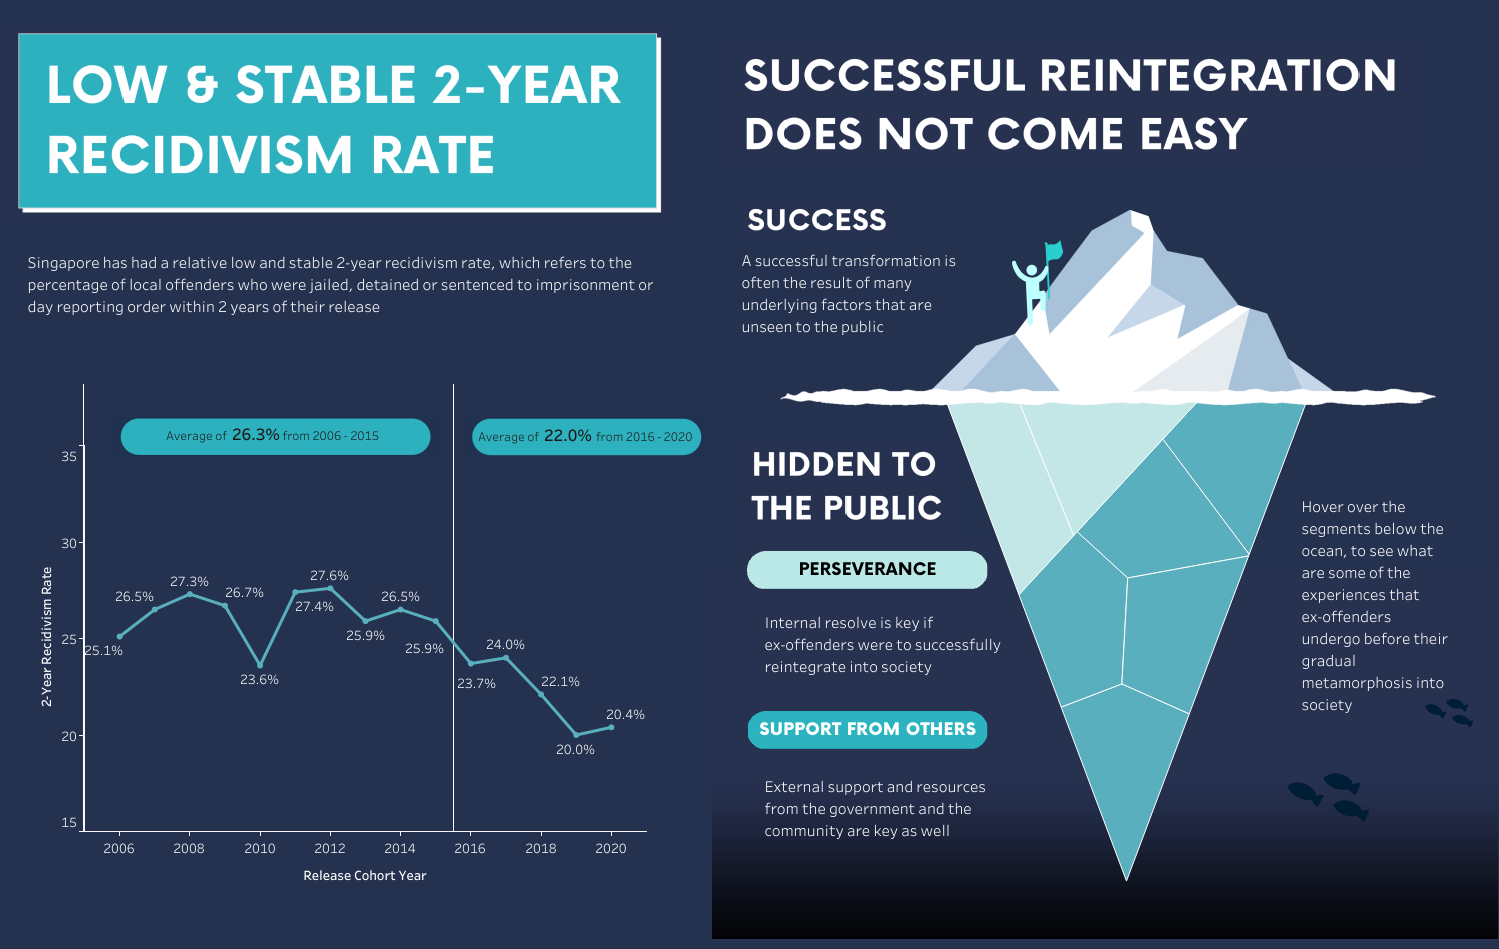 The infographic displays Singapore’s low and stable 2-year recidivism rates with a line chart for 2006-2020, alongside a large iceberg illustration representing the hidden complexities of successful reintegration into society. It includes text sections on perseverance and external support, emphasizing the unseen challenges of reintegrating former offenders.